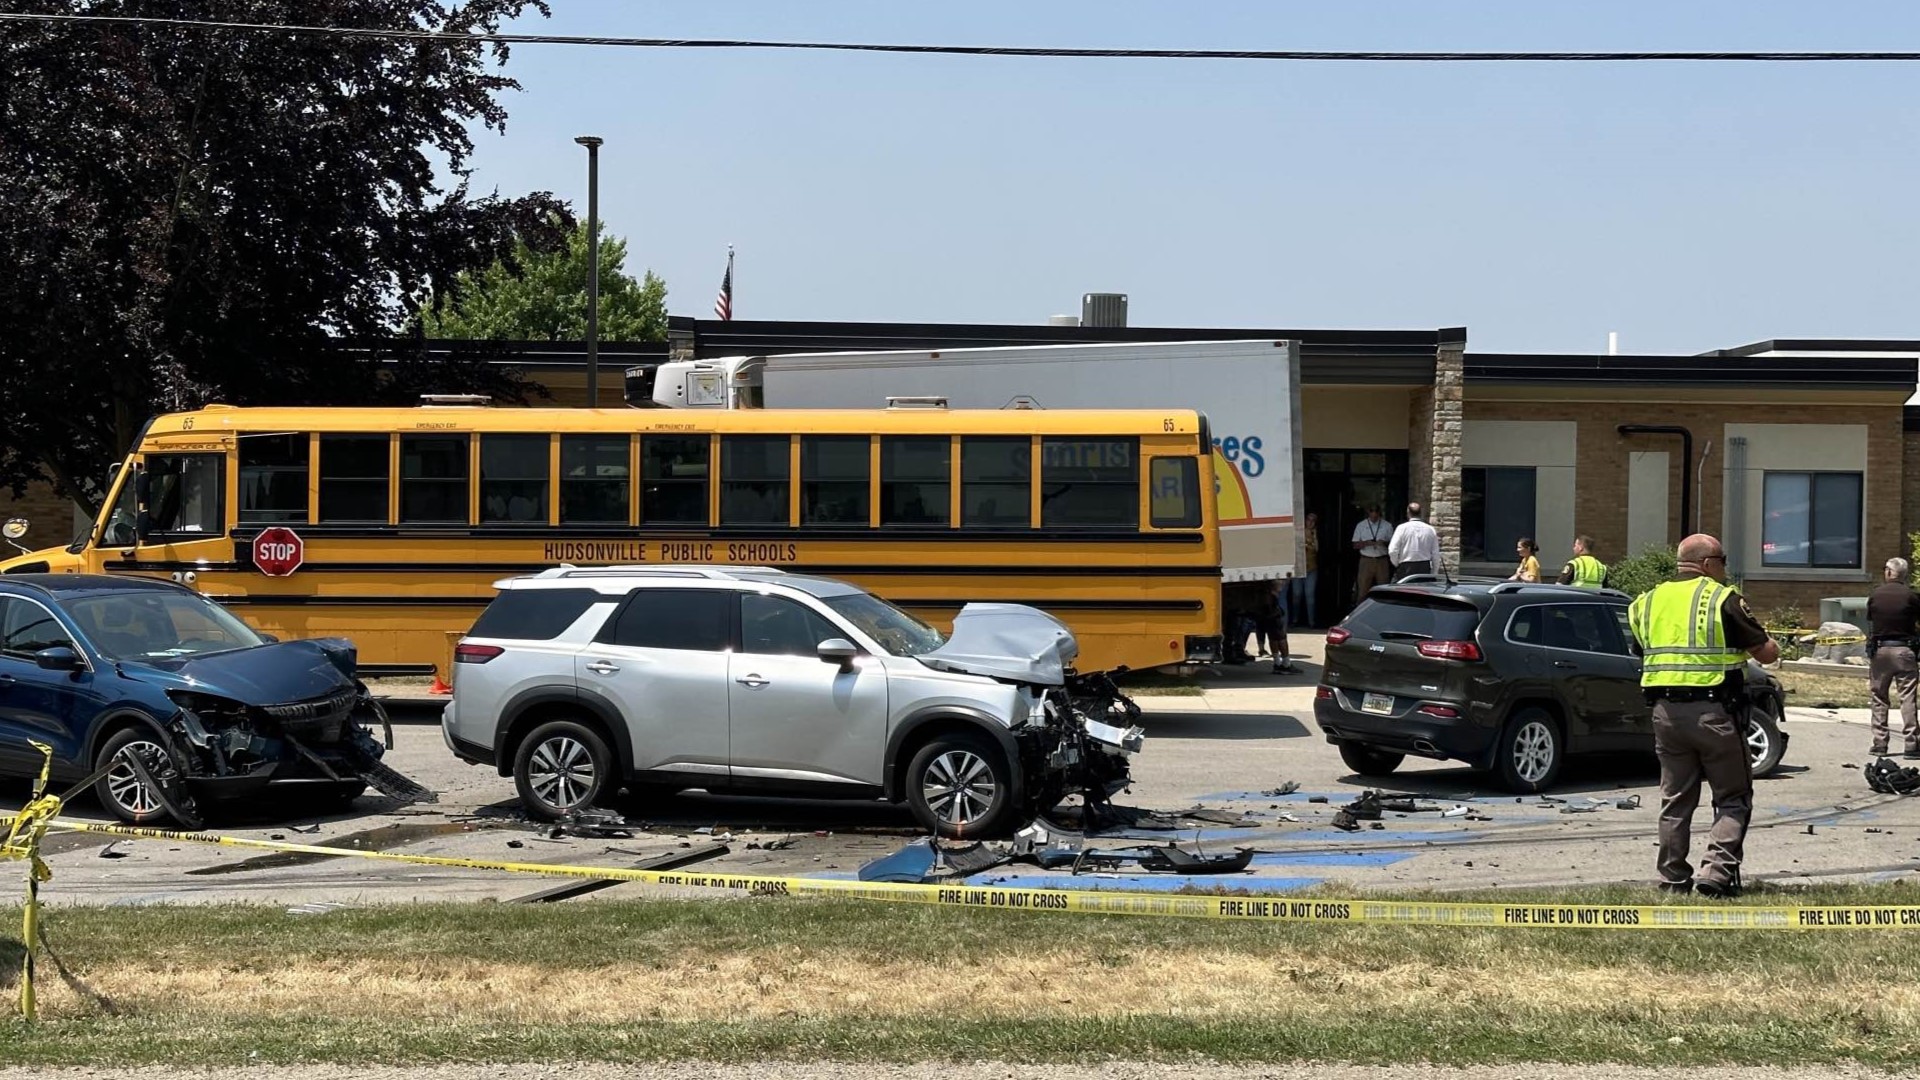 A pedestrian was seriously injured in the crash at Forest Grove Elementary School. The box truck also struck a school bus and 5 other vehicles.